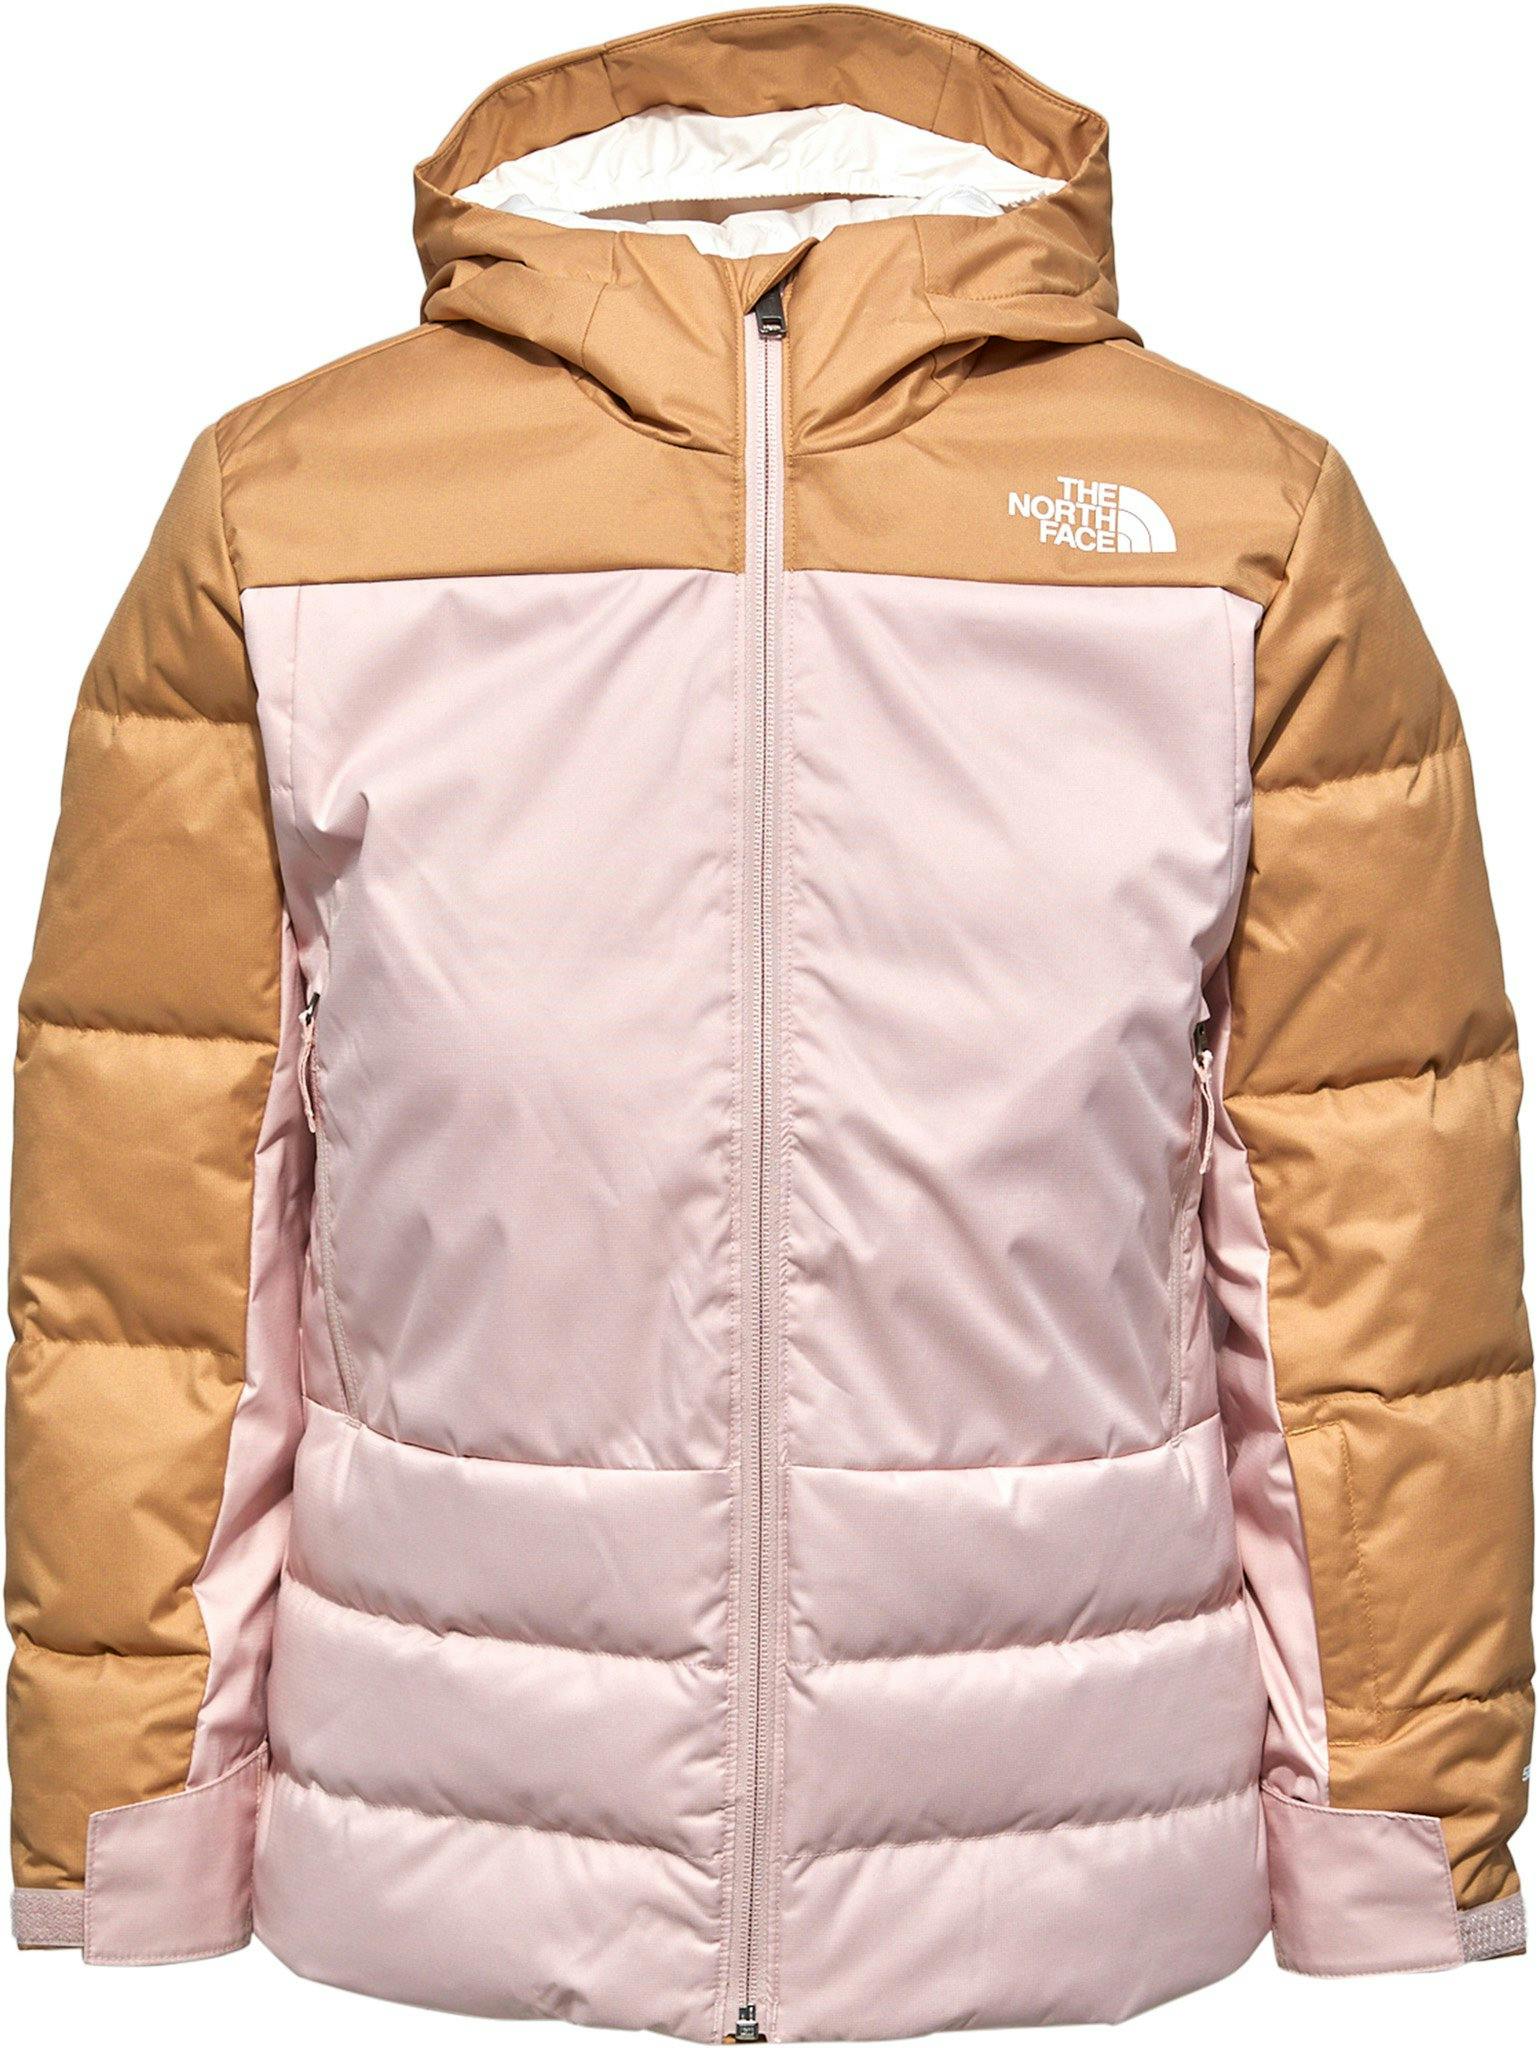 Product image for Pallie Down Jacket - Girls